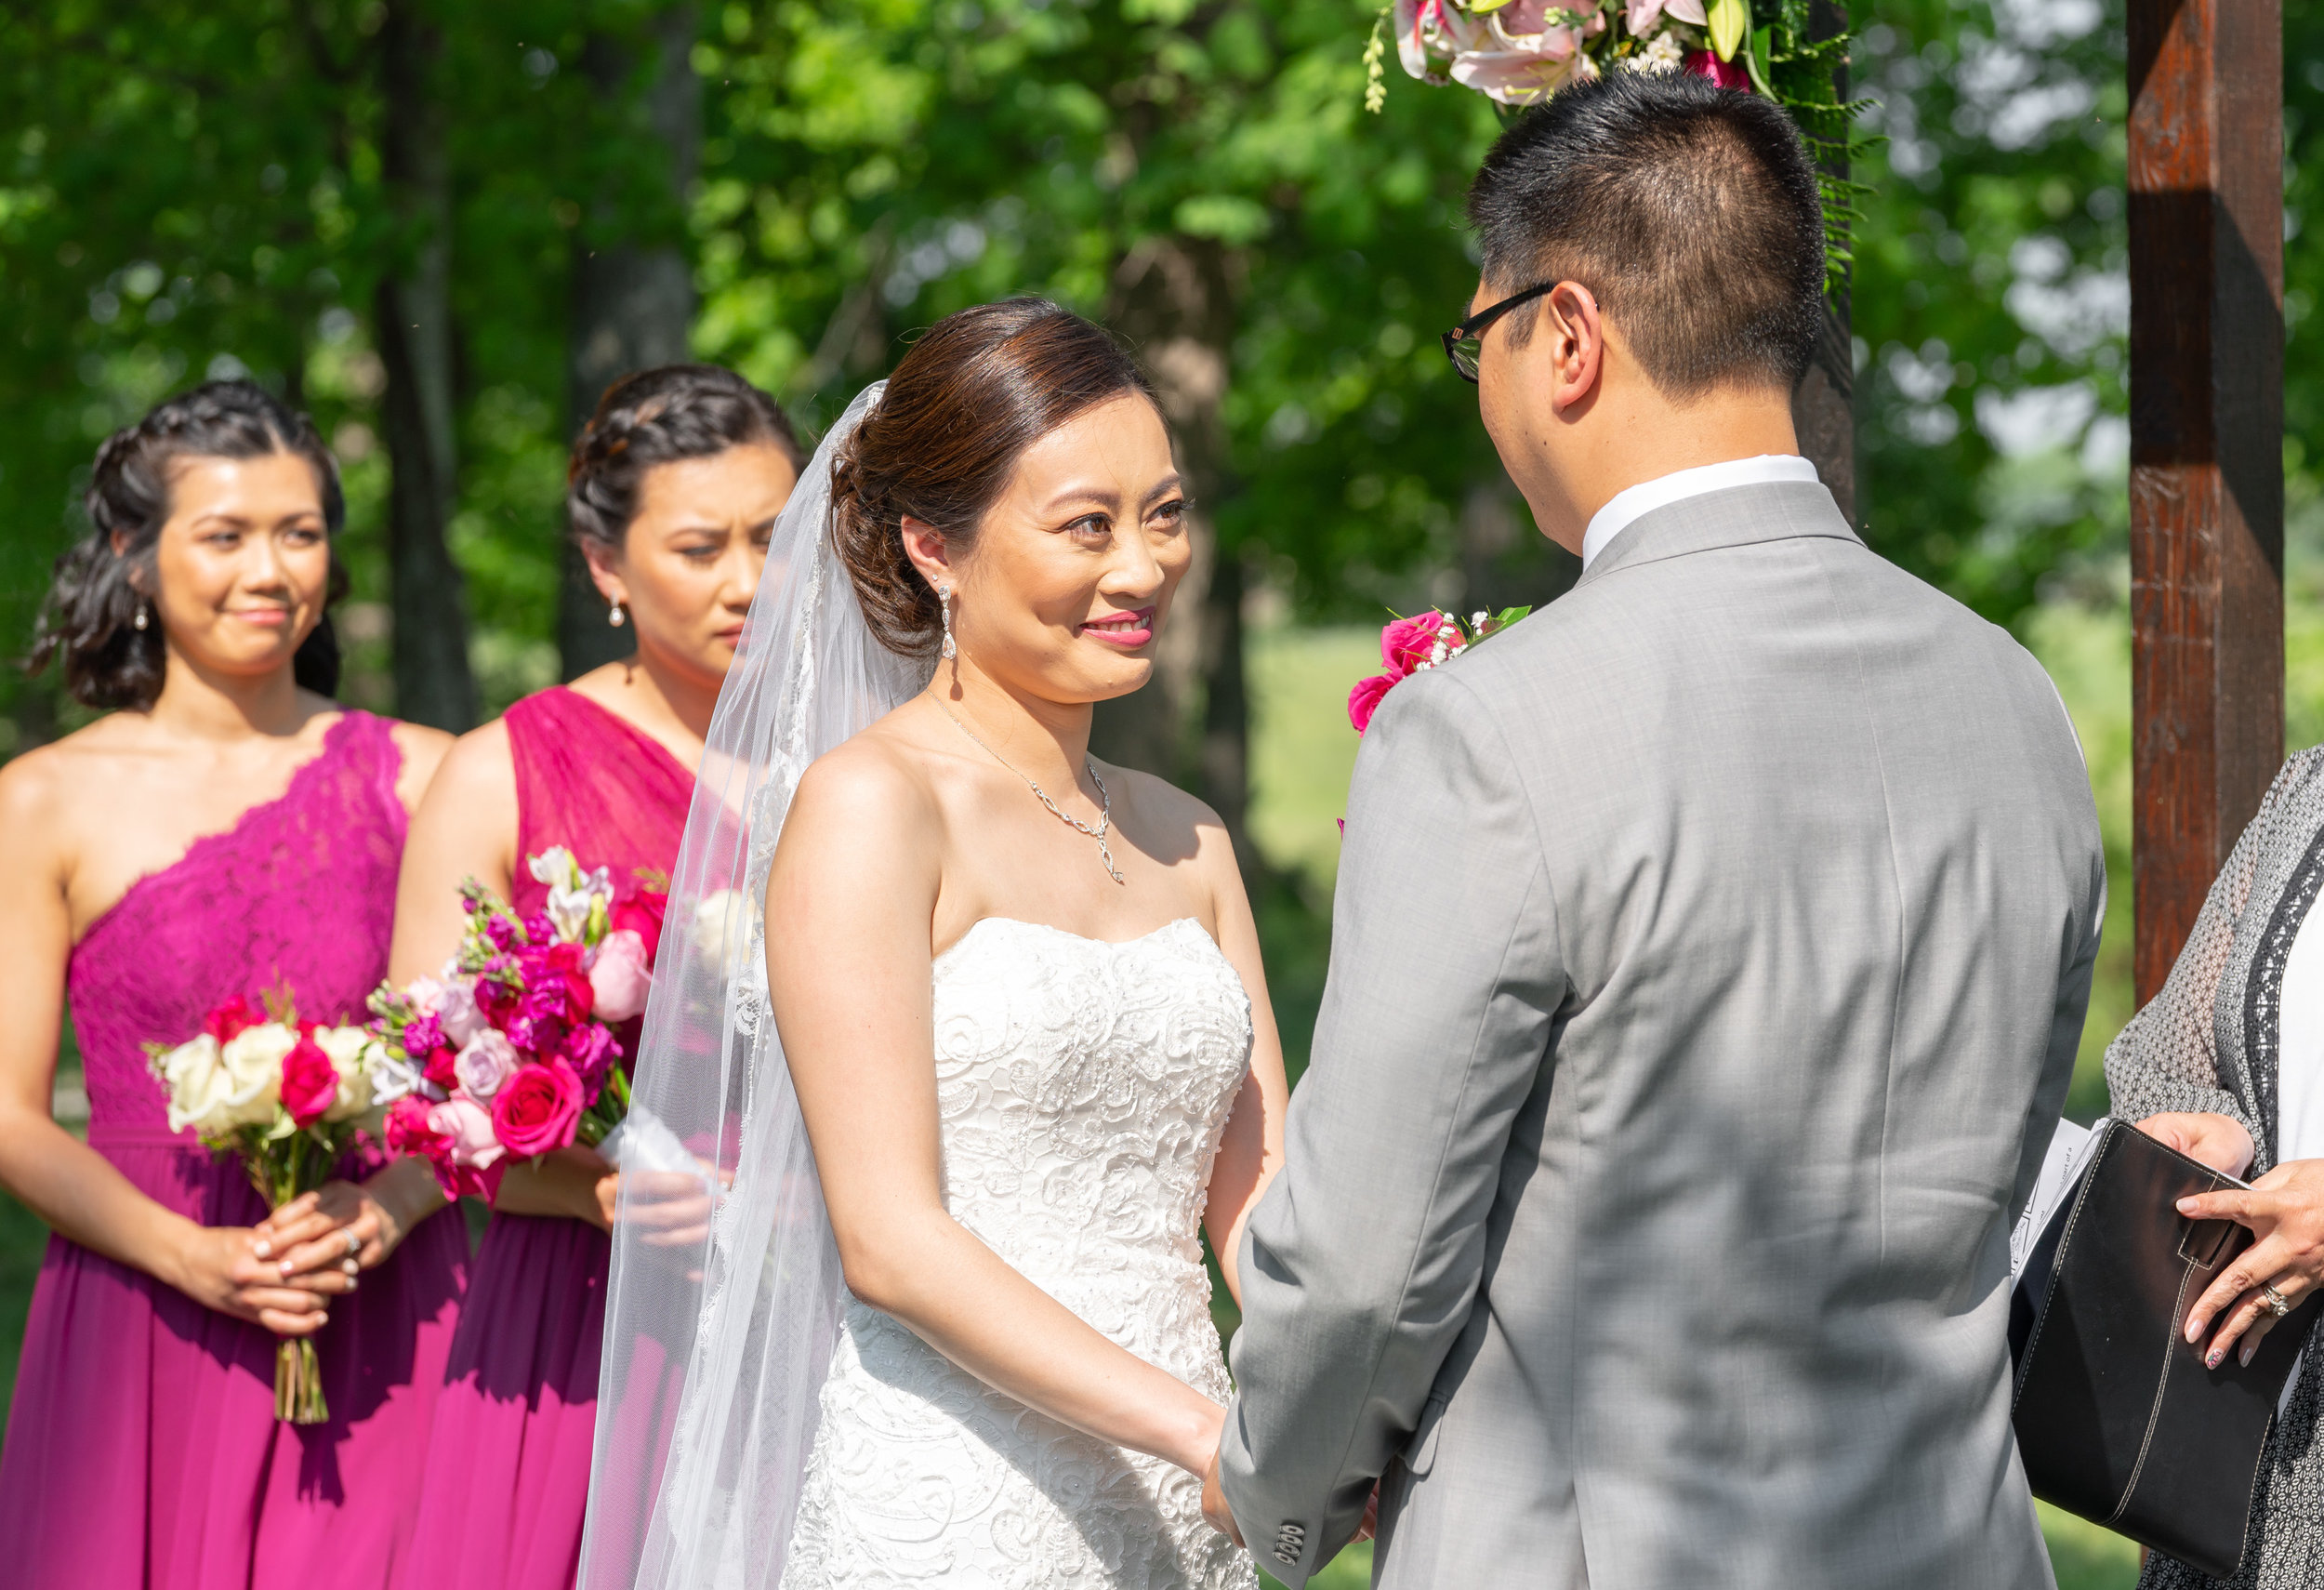 Chinese Filipino fusion wedding at Lost Creek Winery shot with Sony a7riii and 70-200mm